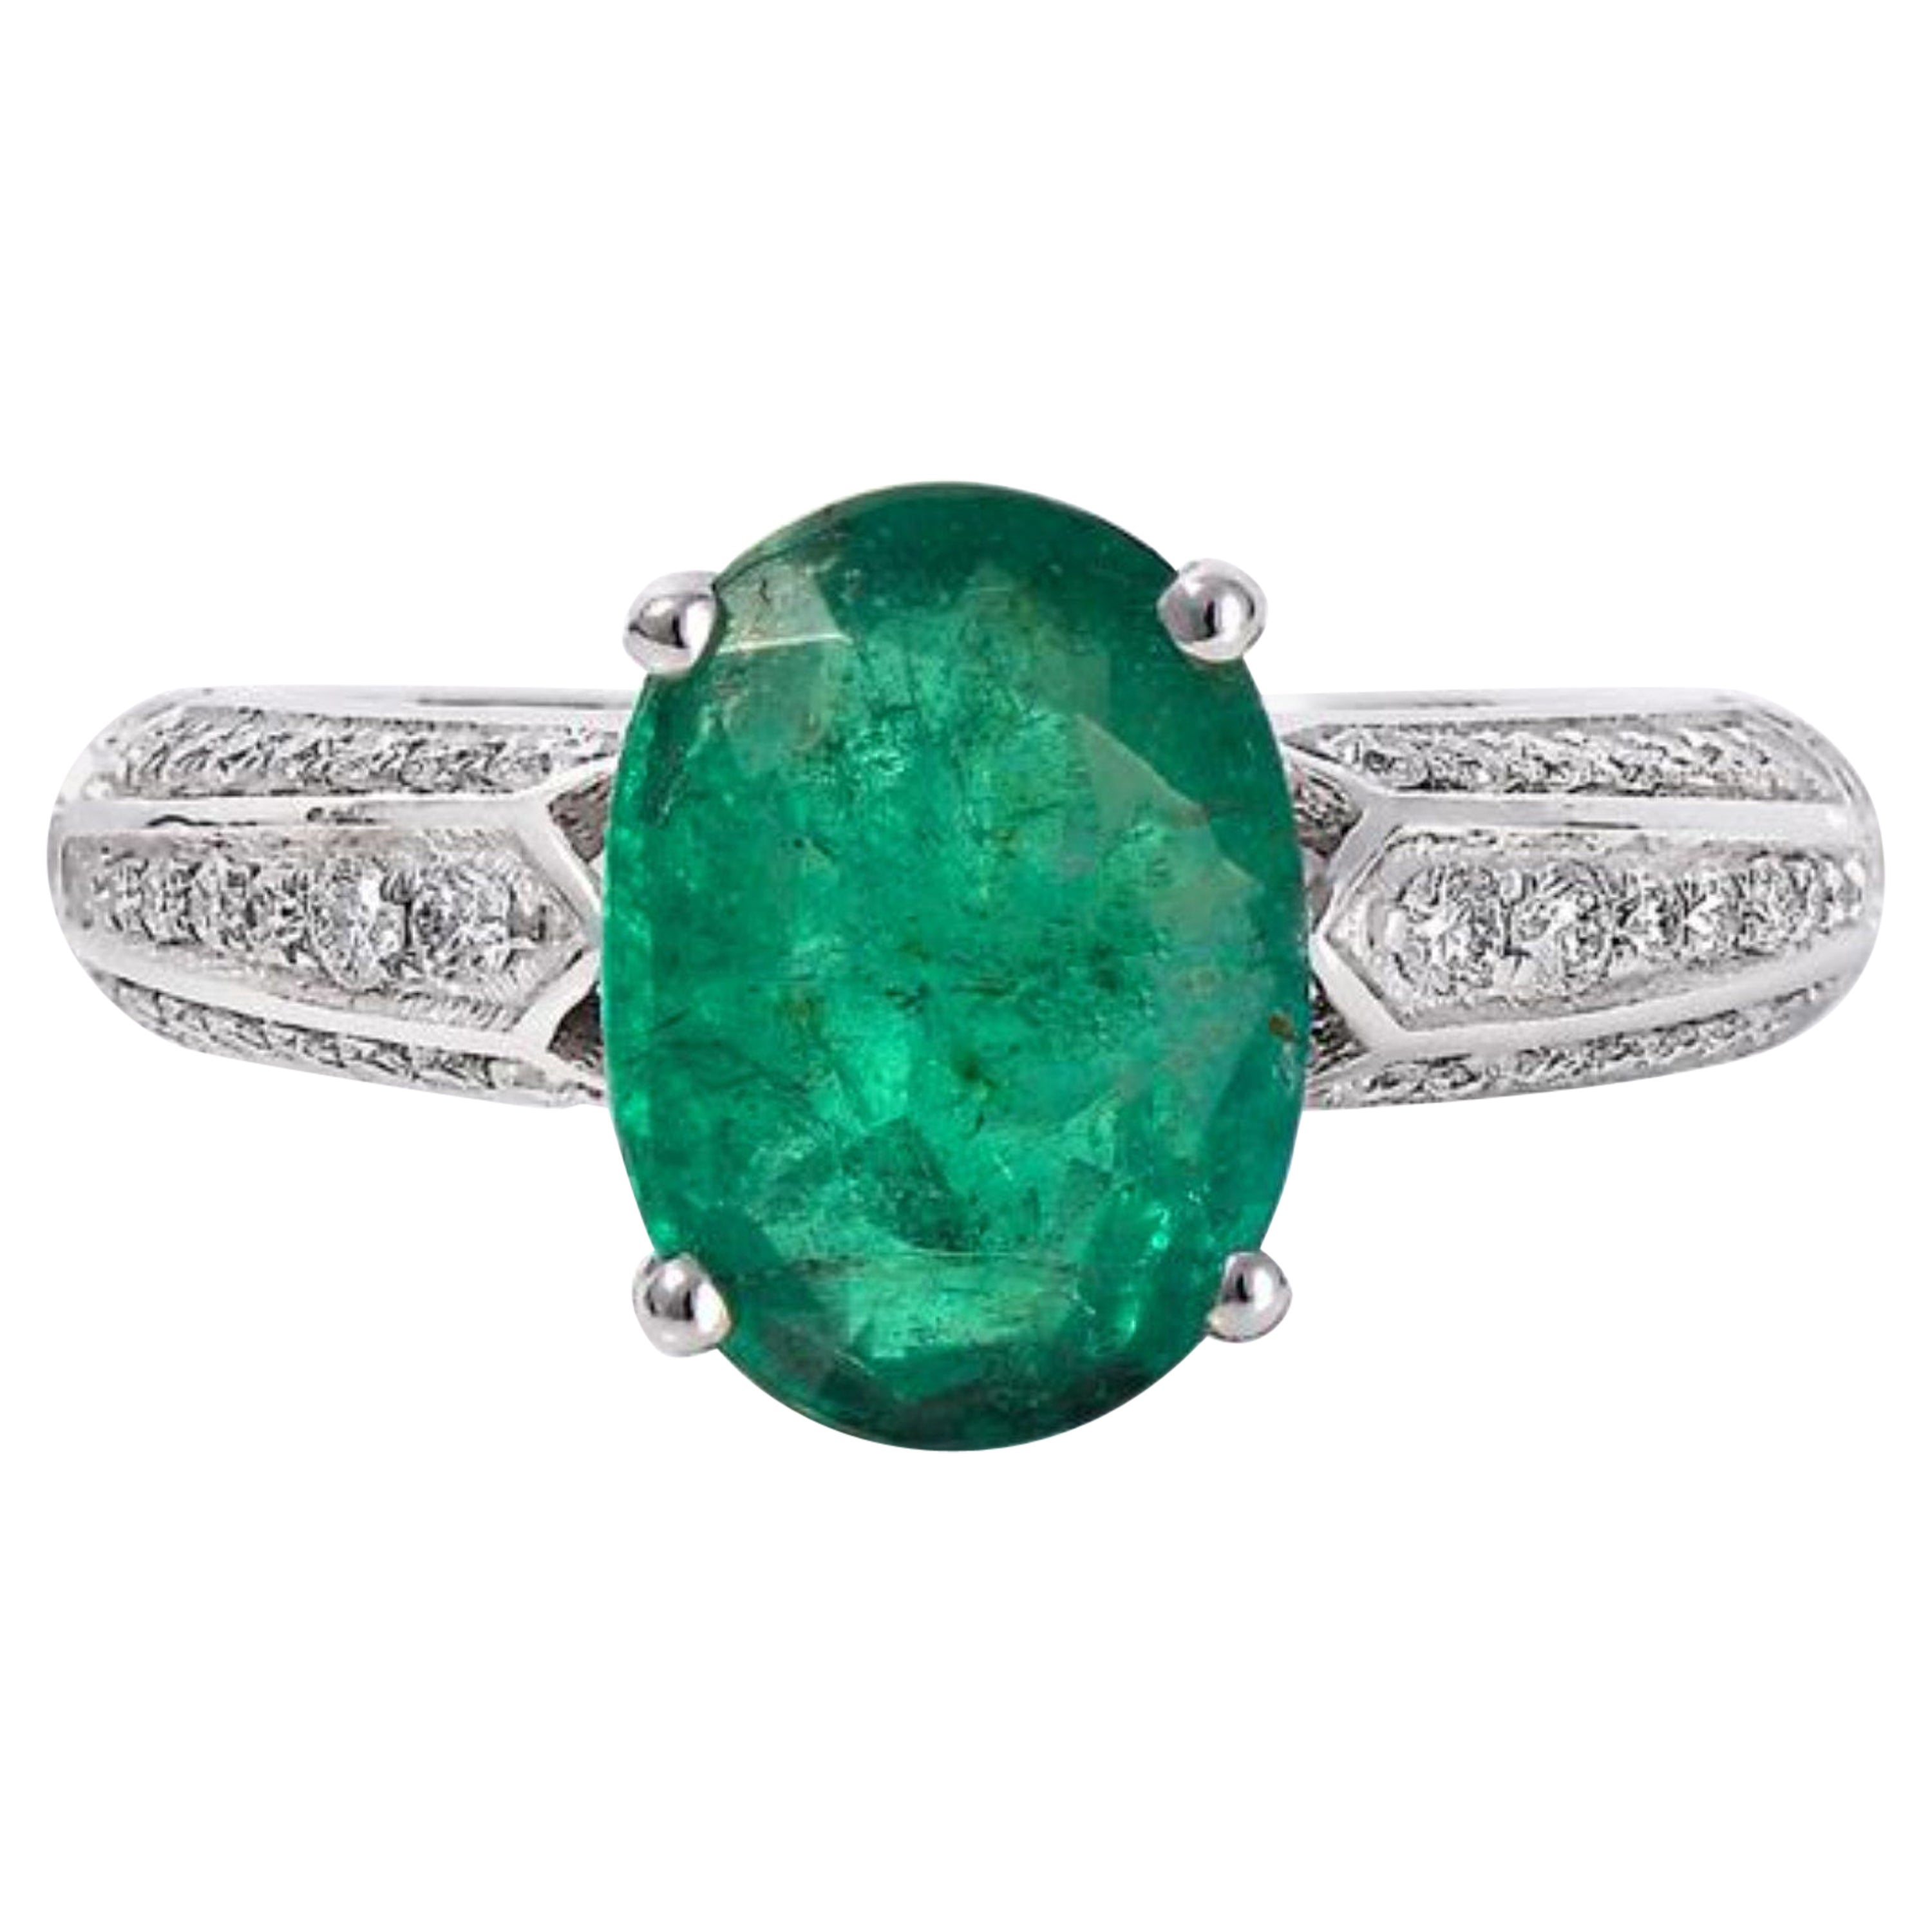 For Sale:  Unique 2 Carat Oval Cut Emerald Diamond Engagement Ring, Vintage White Gold Ring